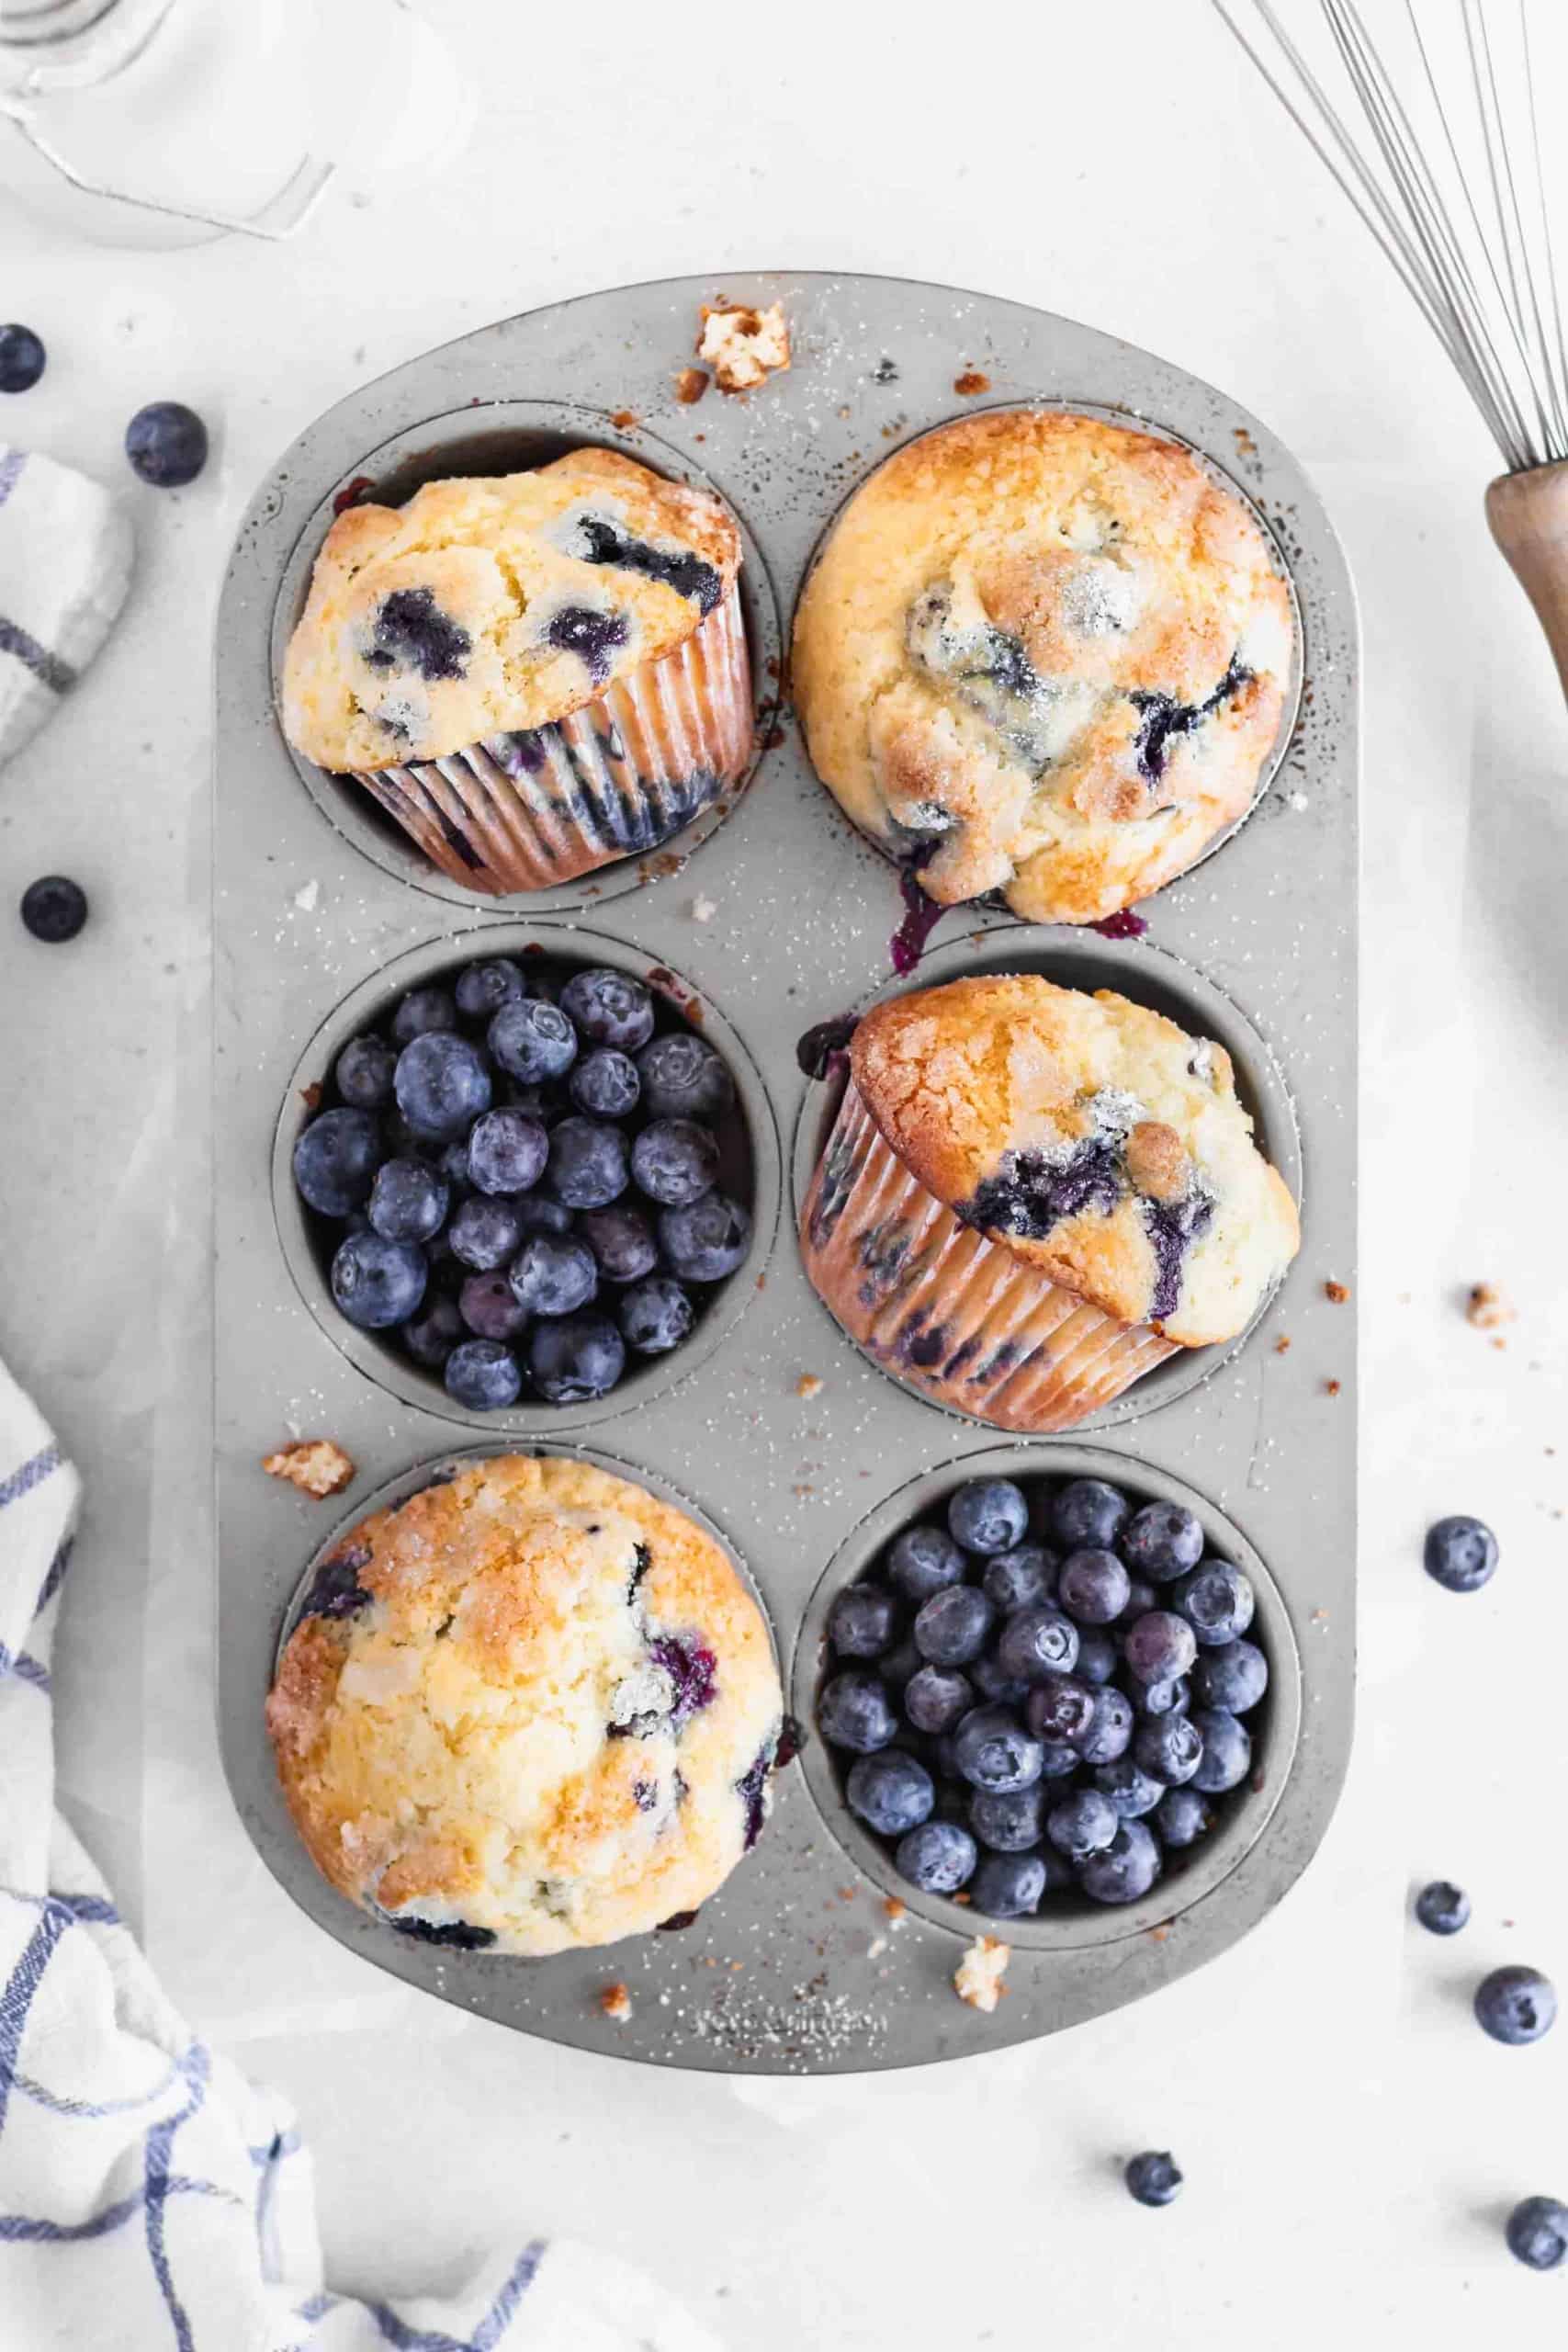 Blueberry muffins and fresh blueberries in a muffin pan